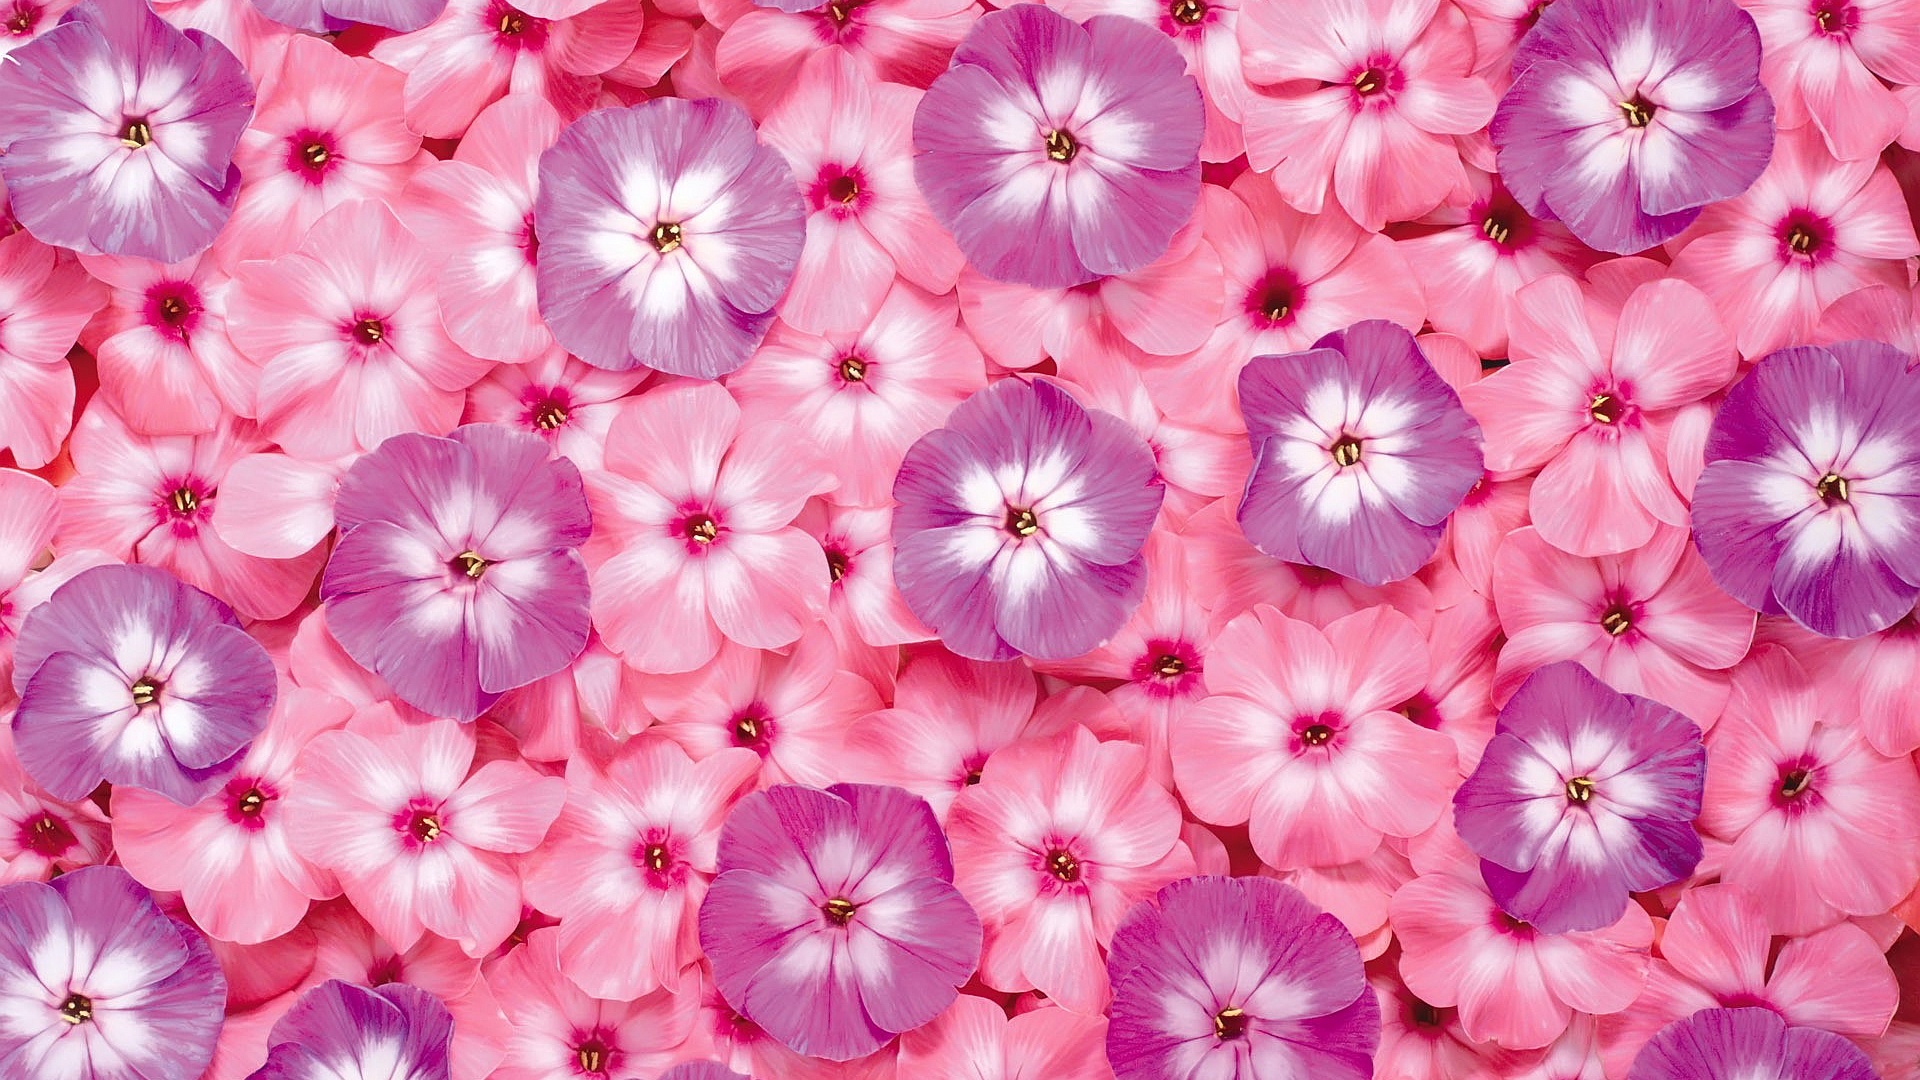 Flowers Pink wallpaper as background.